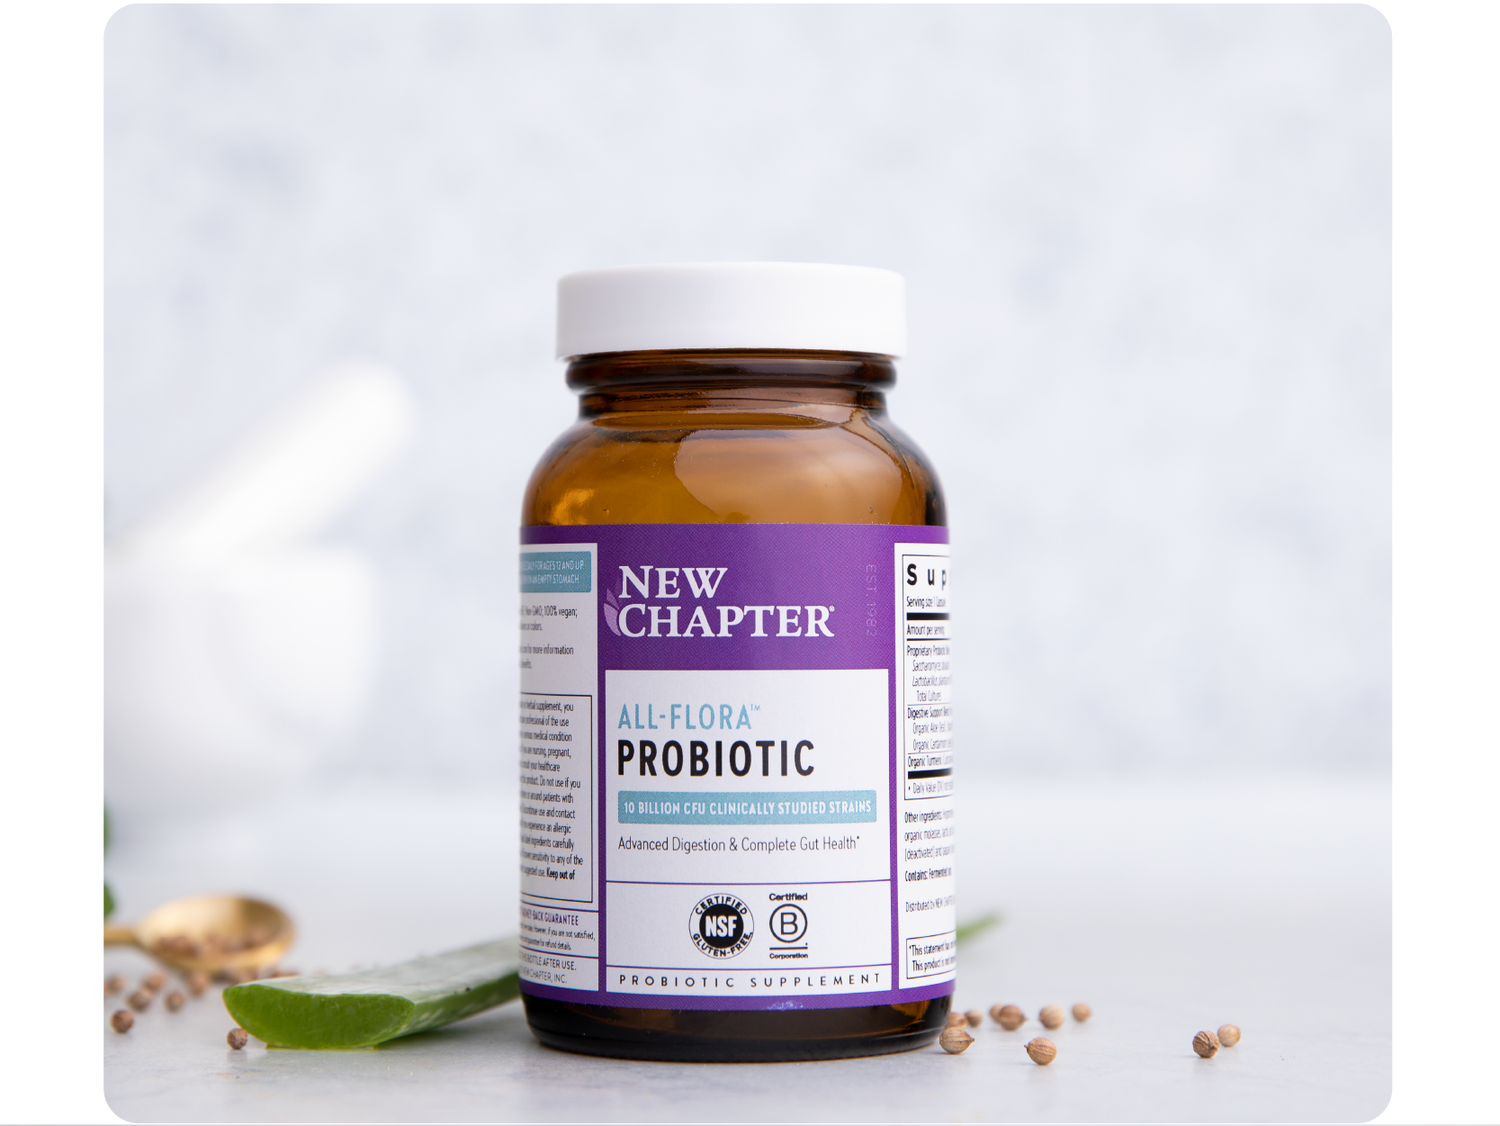 What is The Best Time to Take a Probiotic?